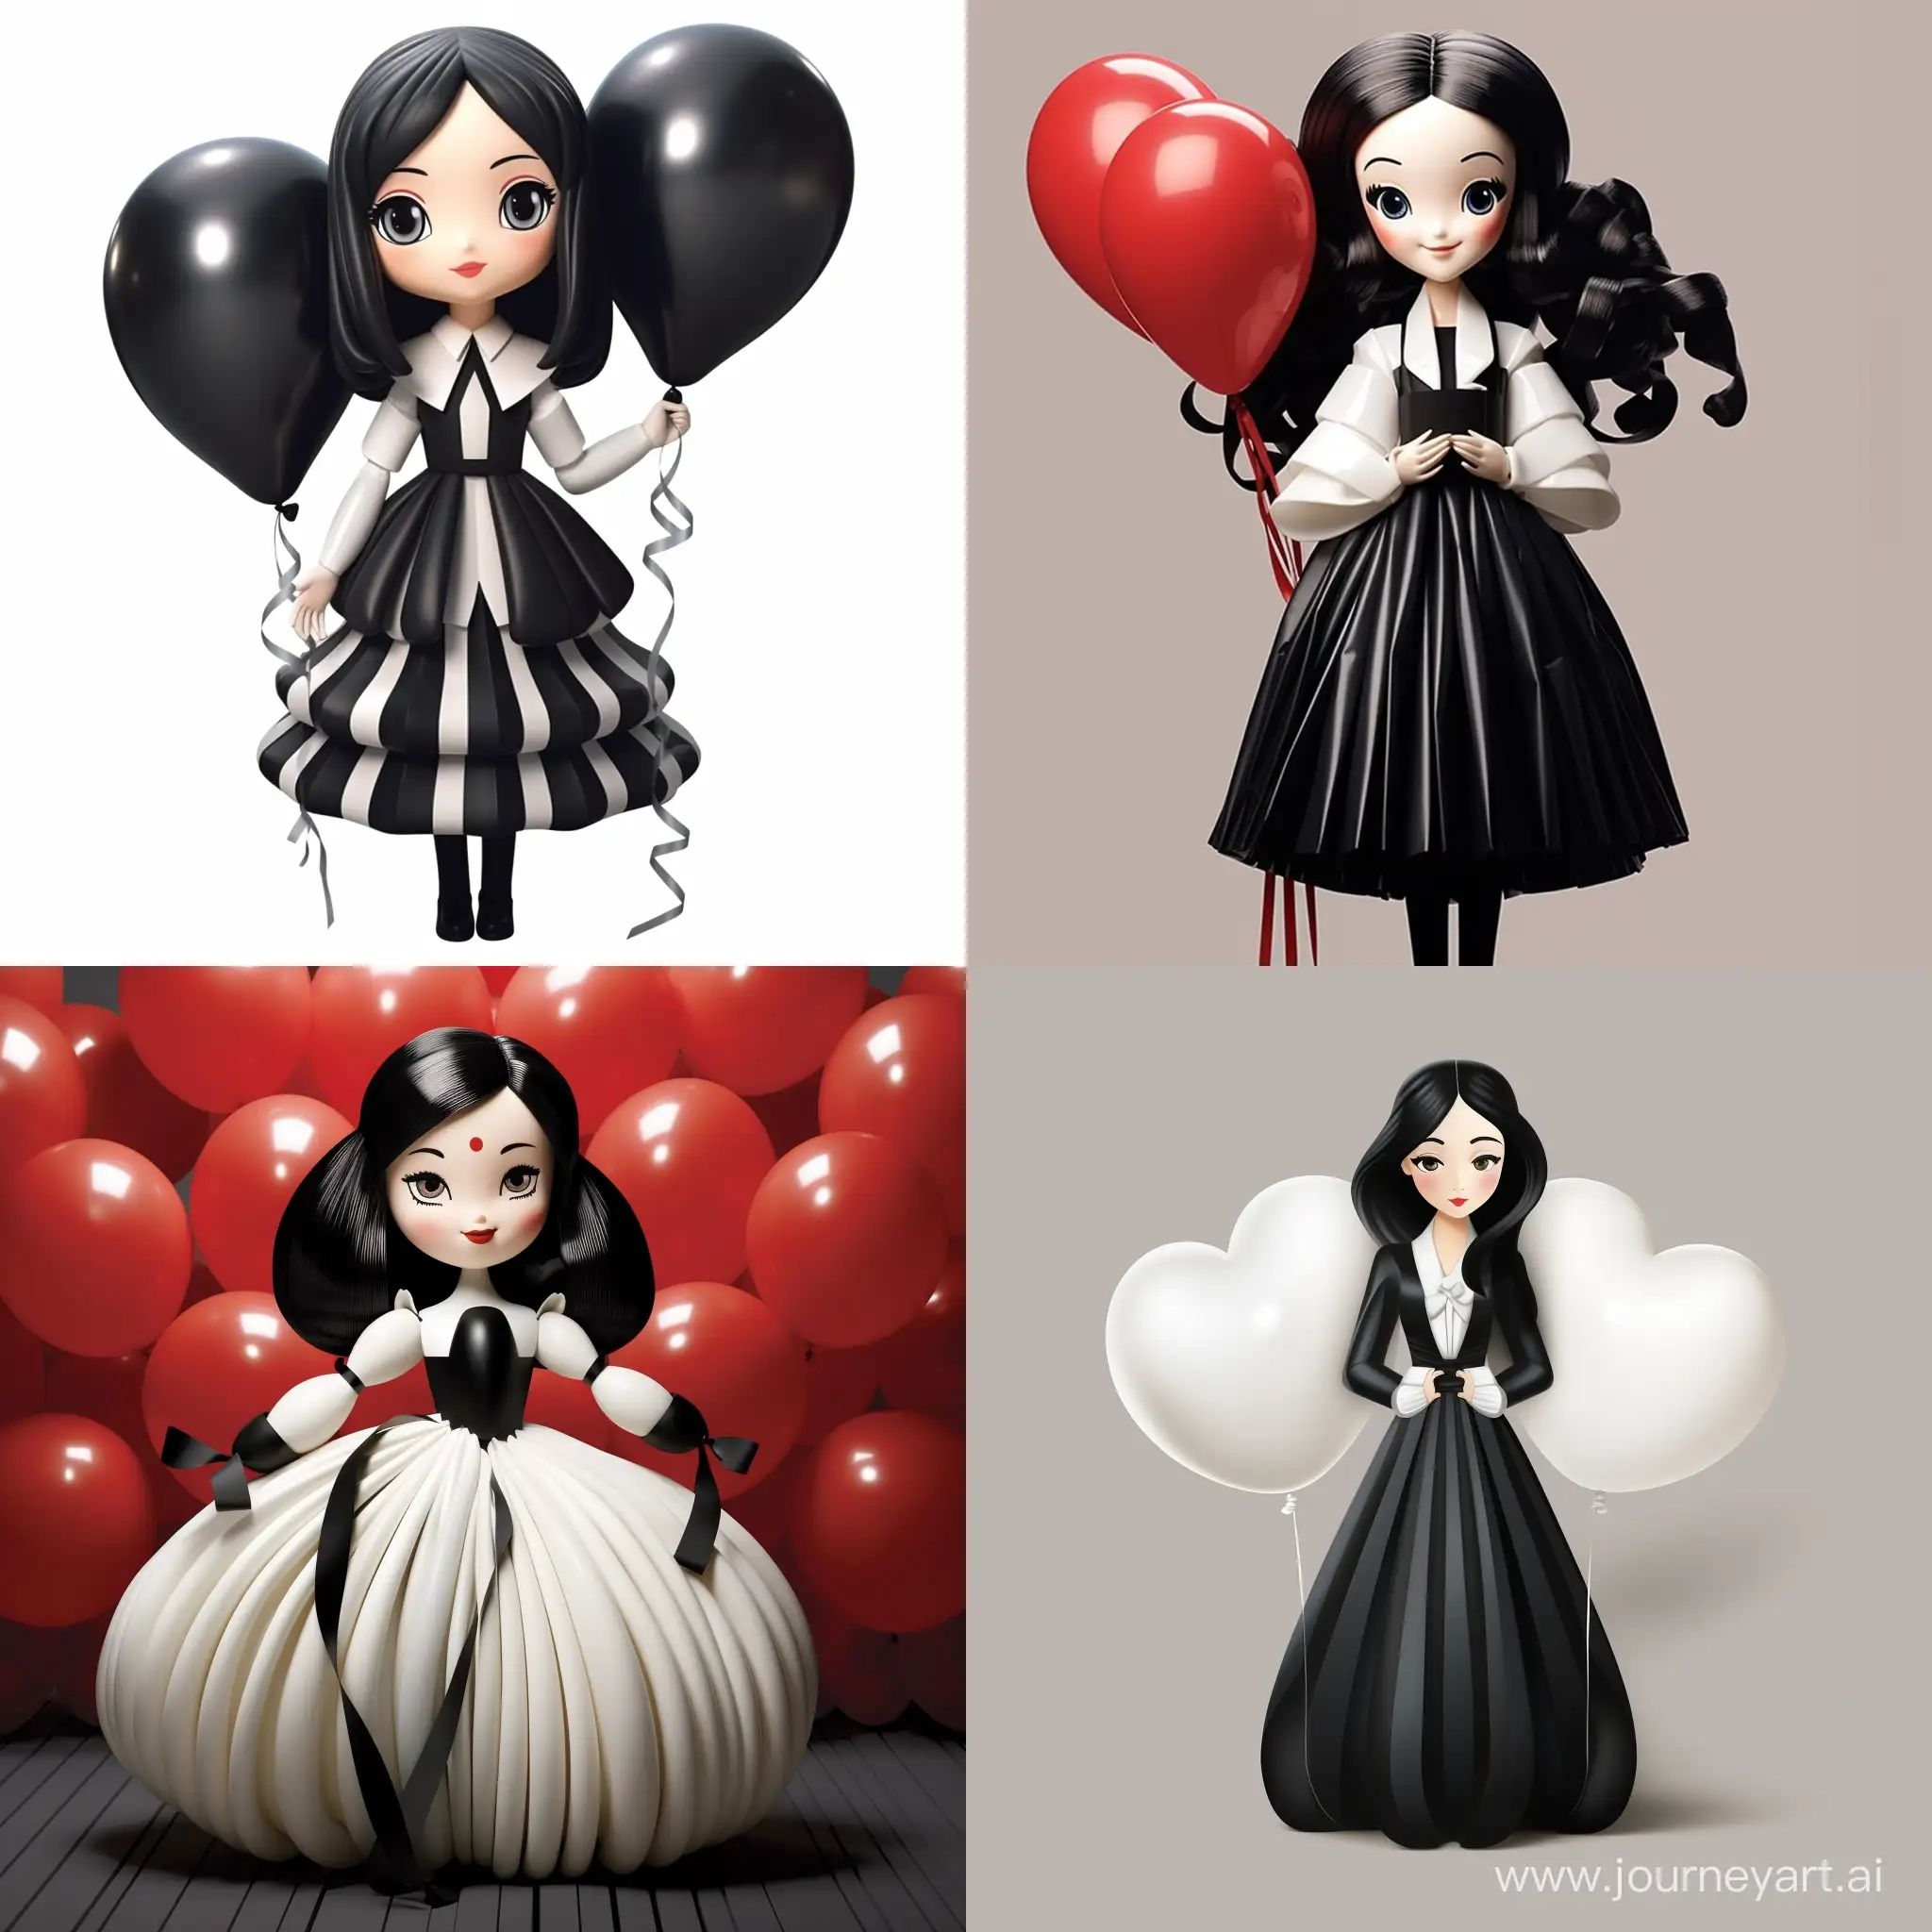 Full body Pixar-style. beautiful japanese girl, transformed into wooden mime puppet, beautiful eyes, shiny black nose, long straight black hair, snow-white wooden face, snow-white wooden skin, big smiles, shiny black and white robe sweetheart neckline, puffy shiny skirt, long satin gloves, bows, heart balloons, in convention